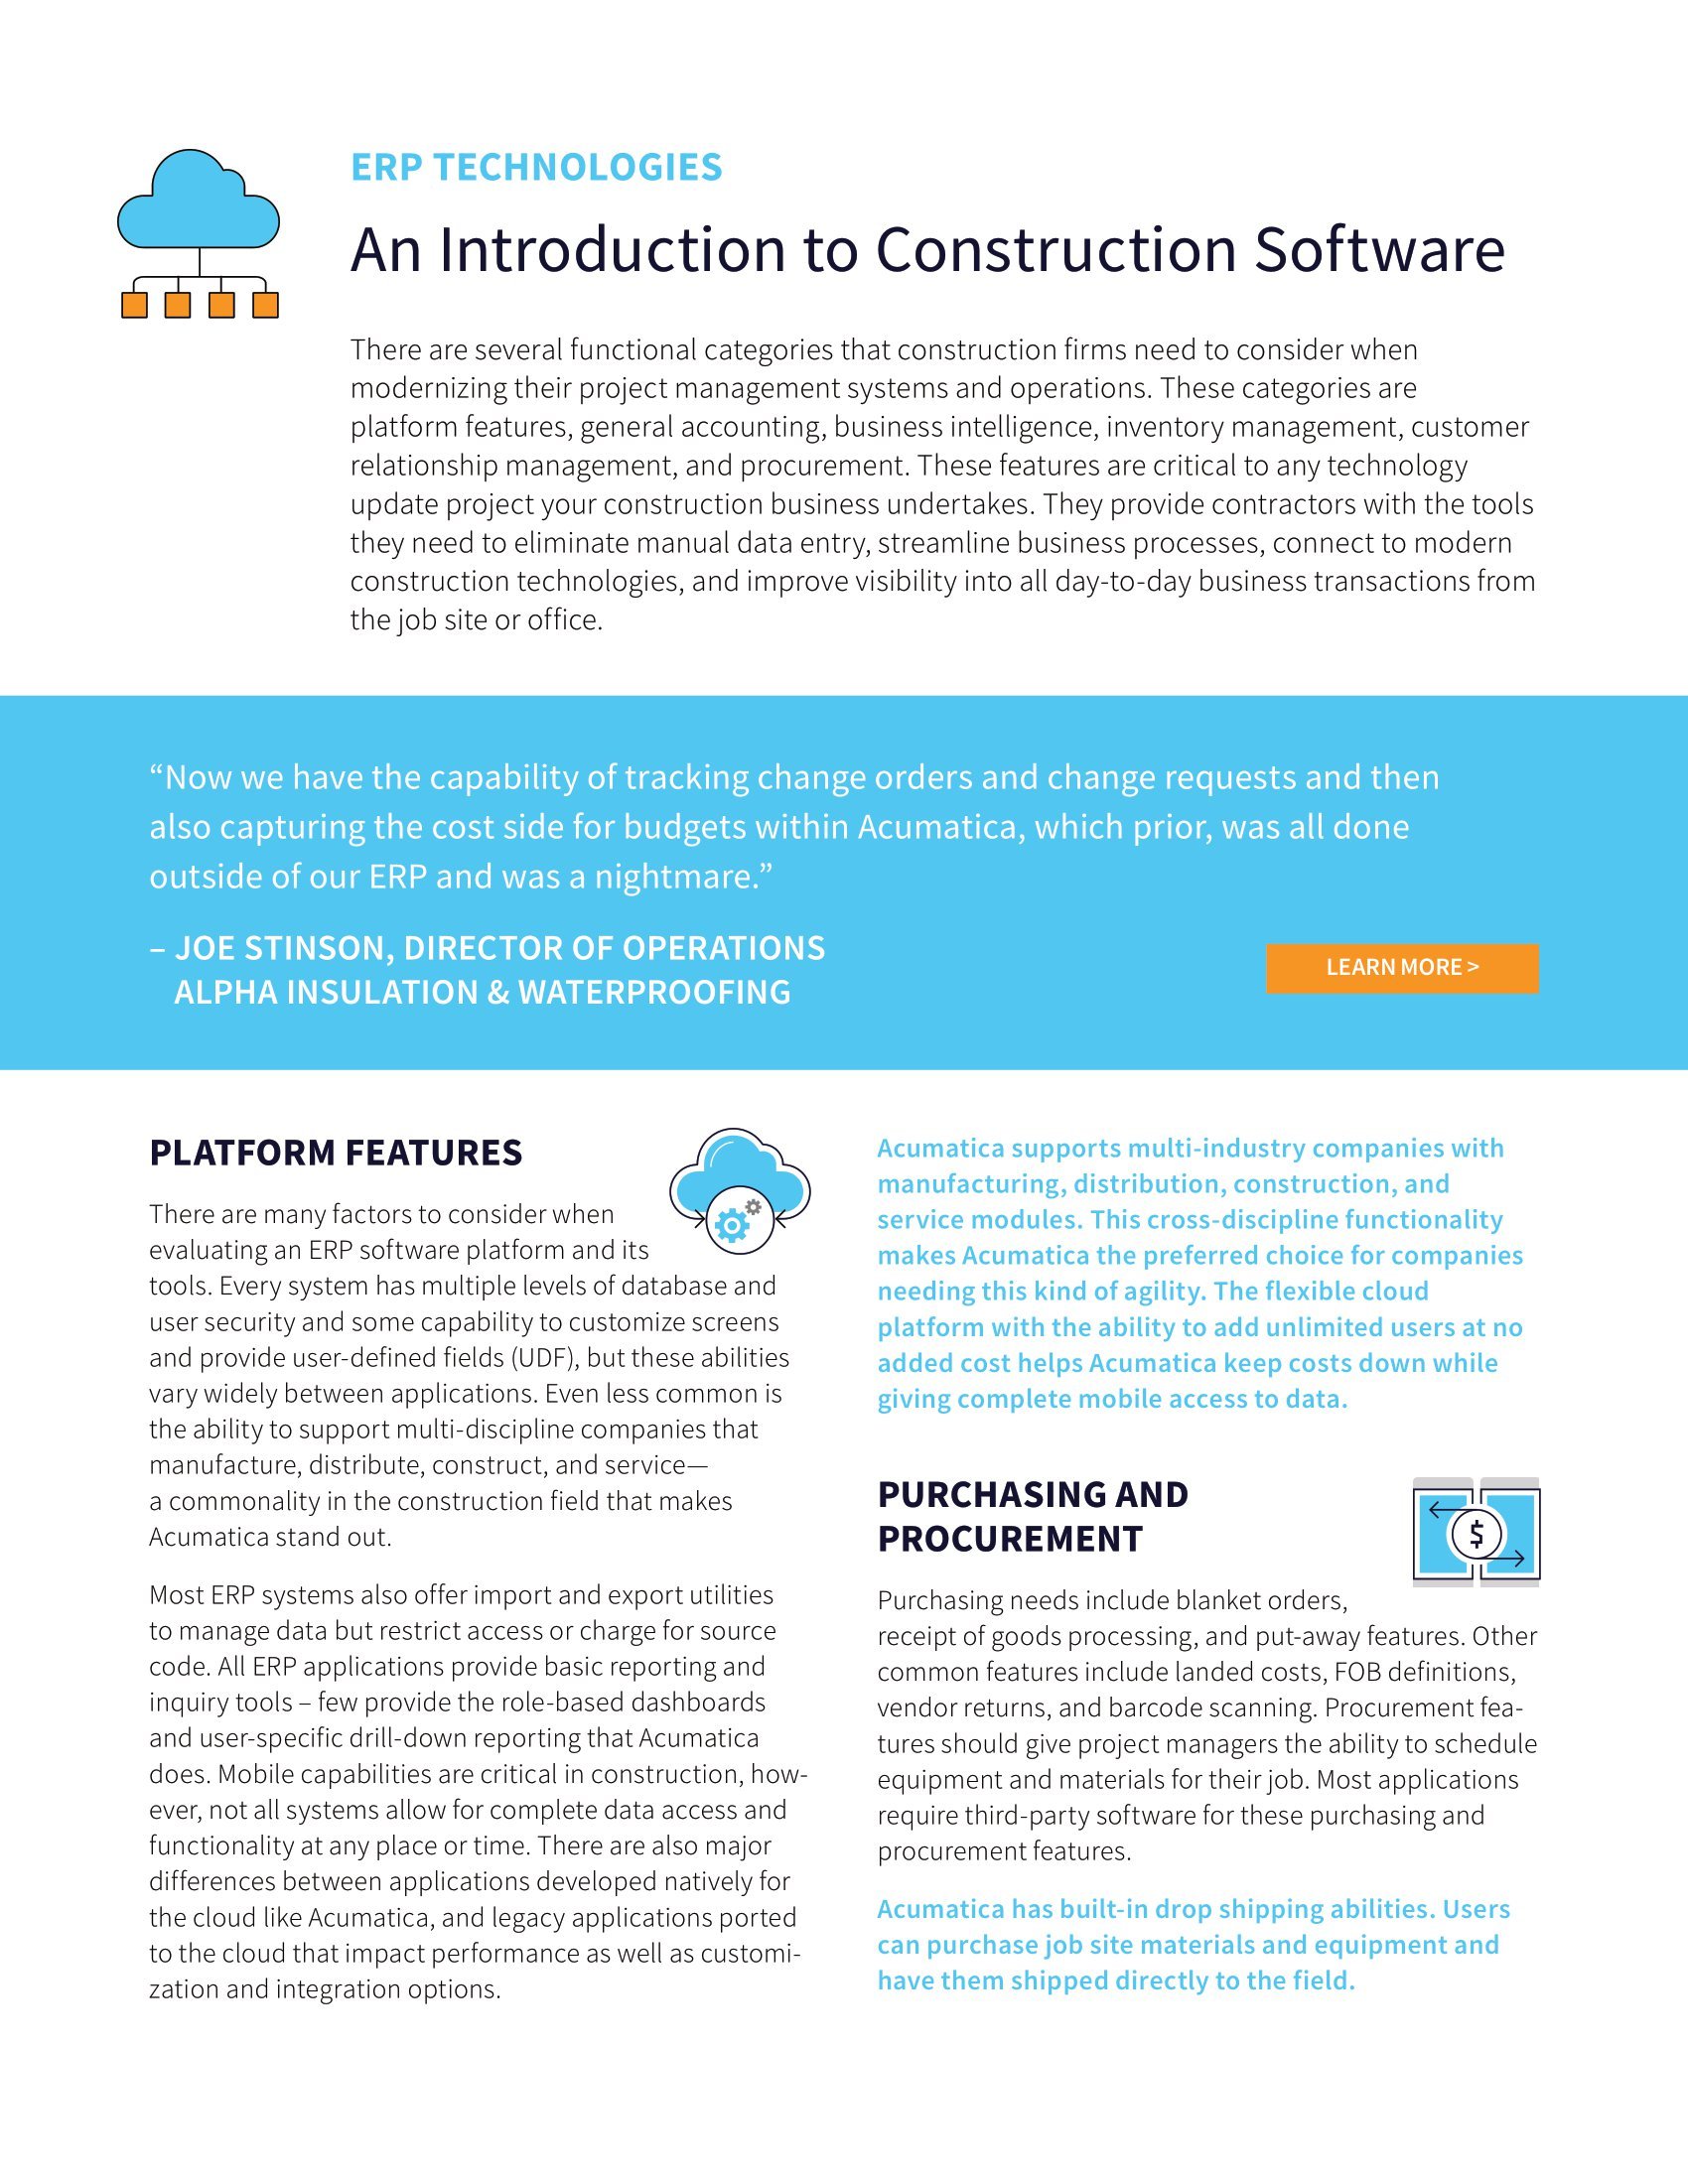 Prepare for the Construction Industry Evolution with a Digital Transformation, page 1